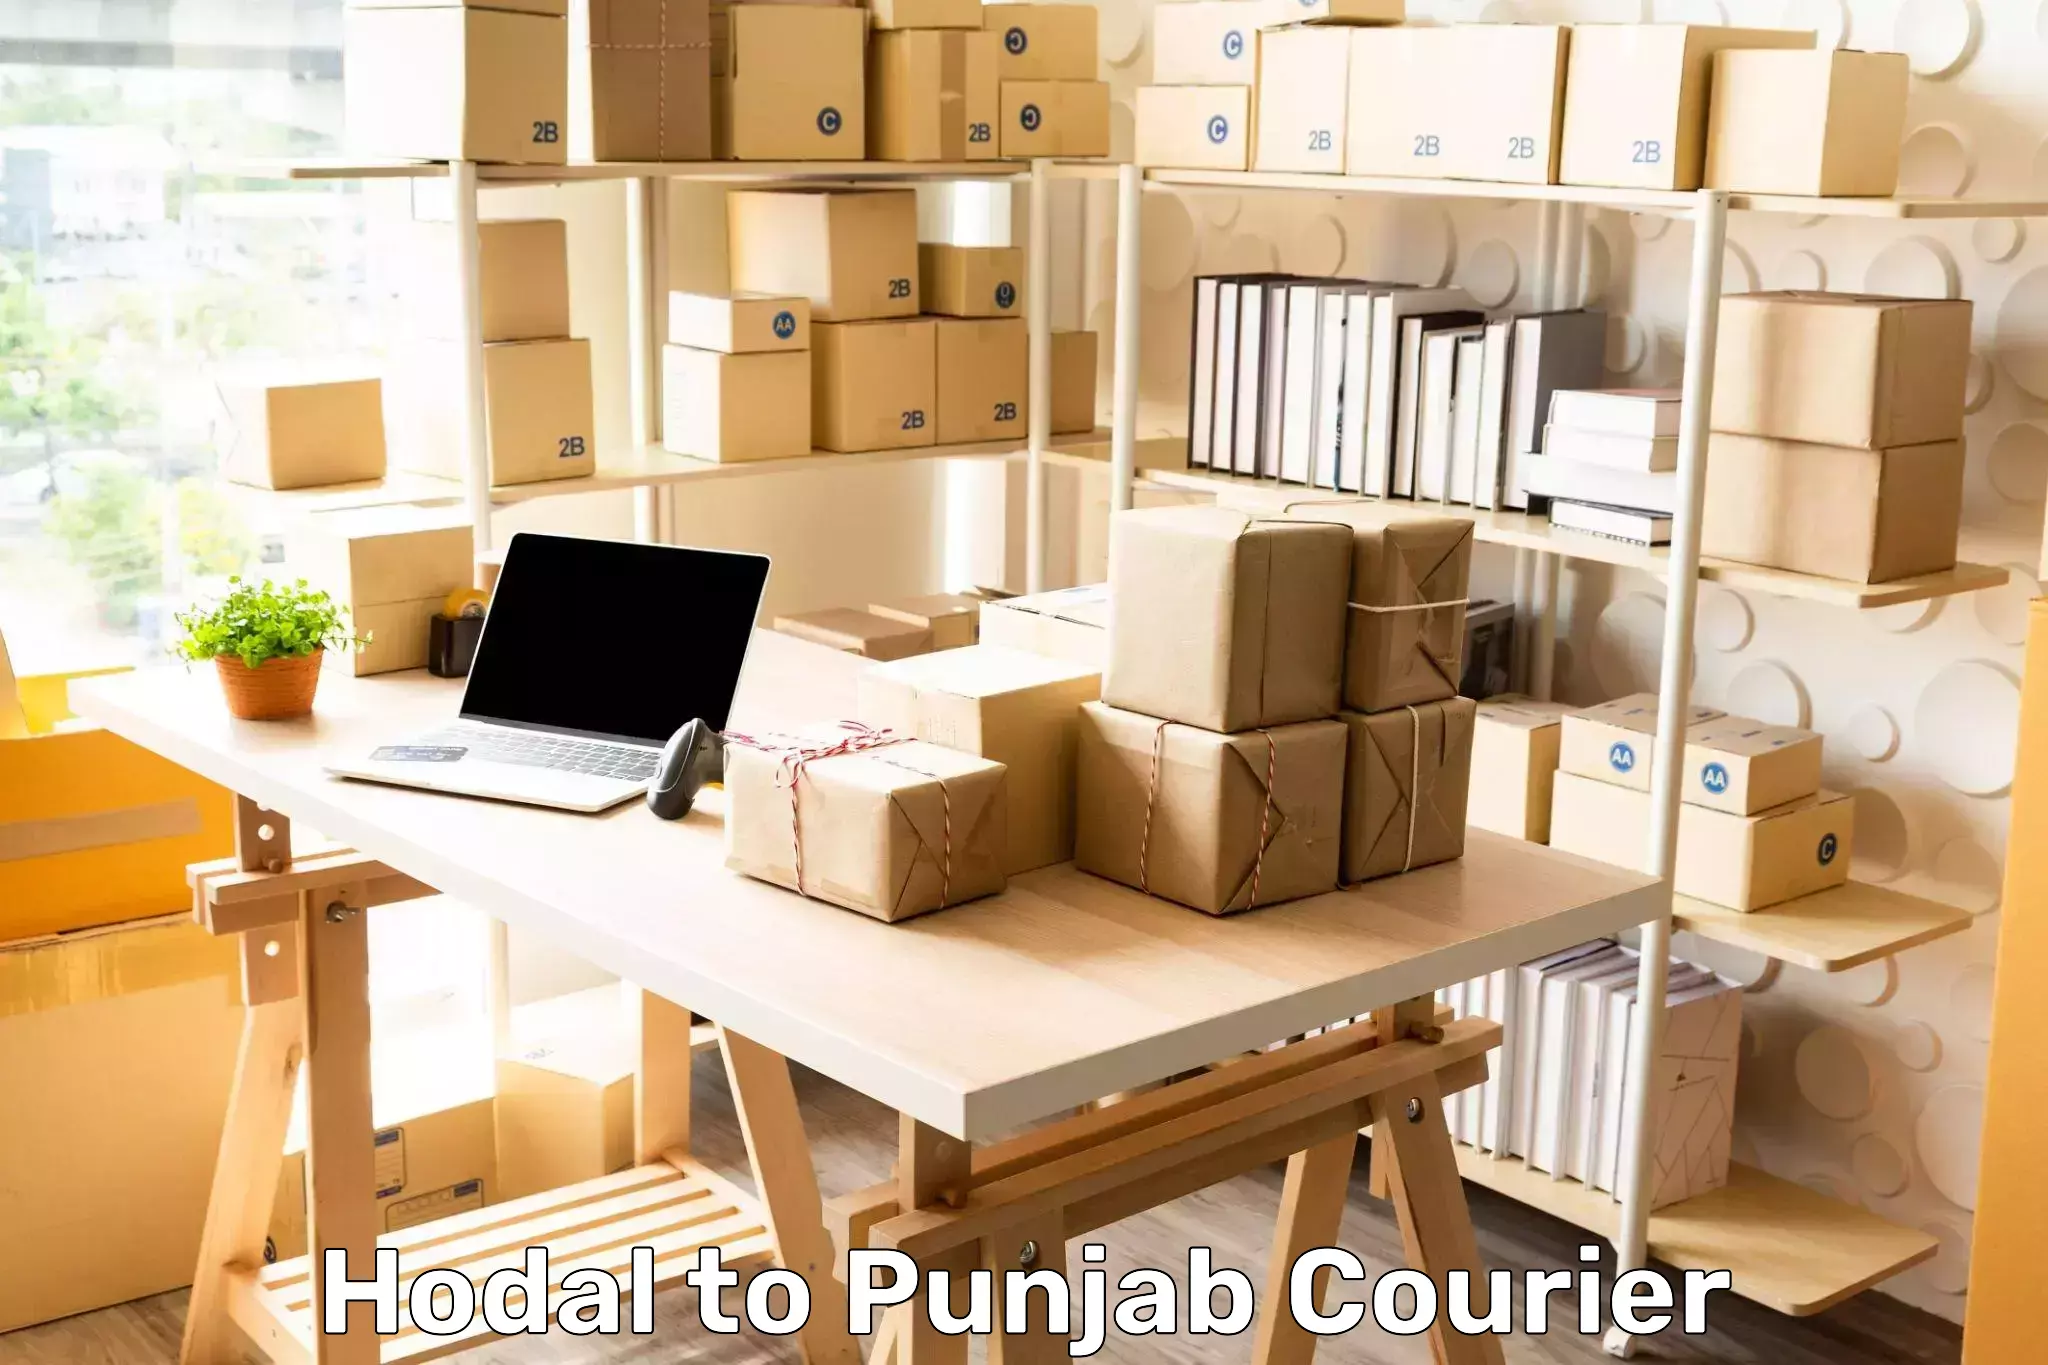 Efficient parcel tracking Hodal to Bathinda